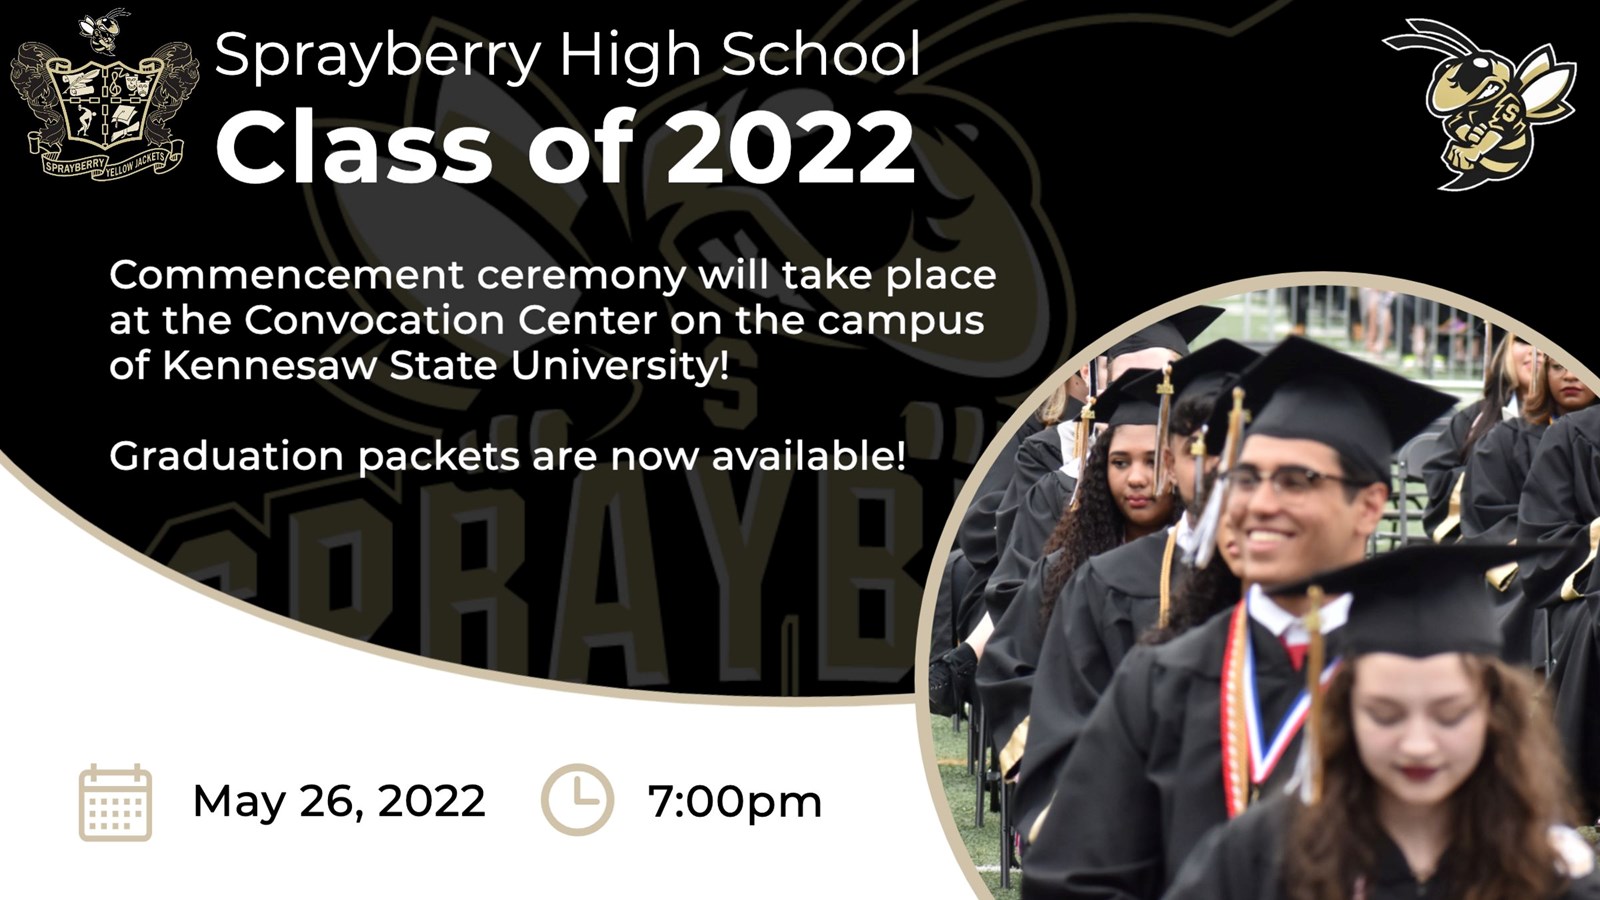 Class of 2022 Commencement Ceremony